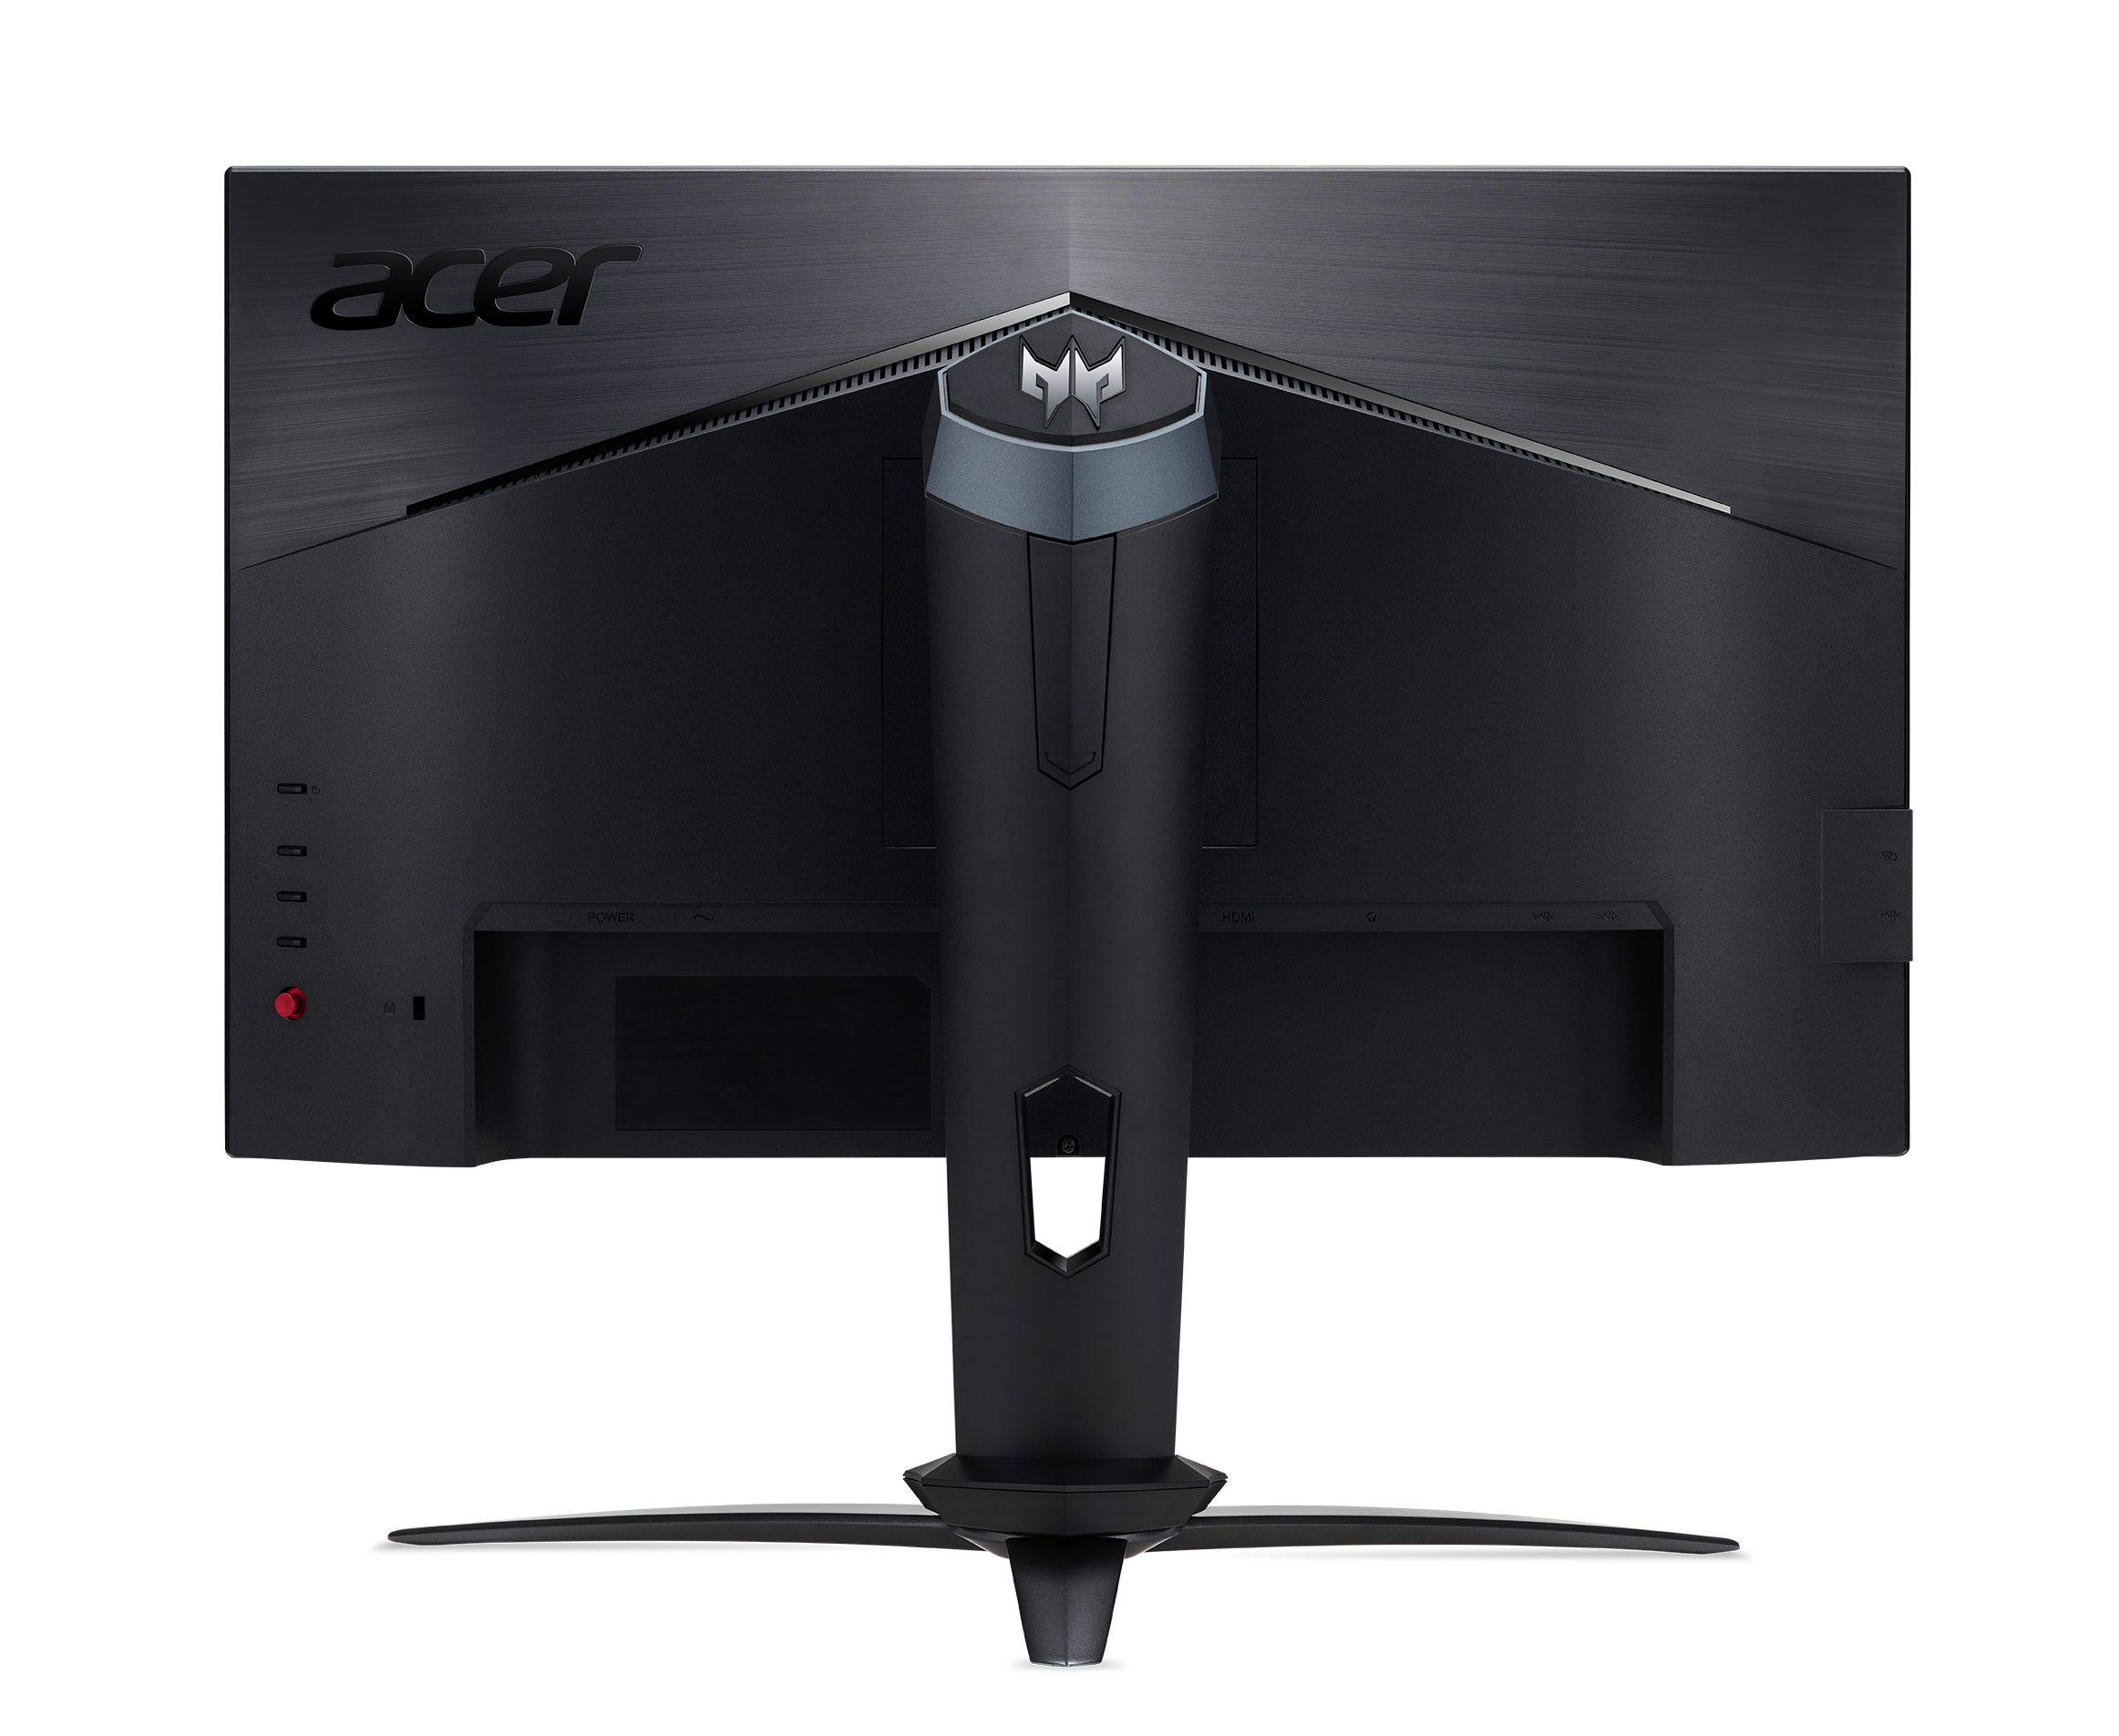 Acer Predator XB273 GZbmiiprx 27" FHD (1920 x 1080) IPS Monitor with NVIDIA G-SYNC Compatible, HDR400, Up to 0.5ms (G to G), Overclock to 280Hz  (1 x Display Port & 2 x HDMI Ports) - image 4 of 9